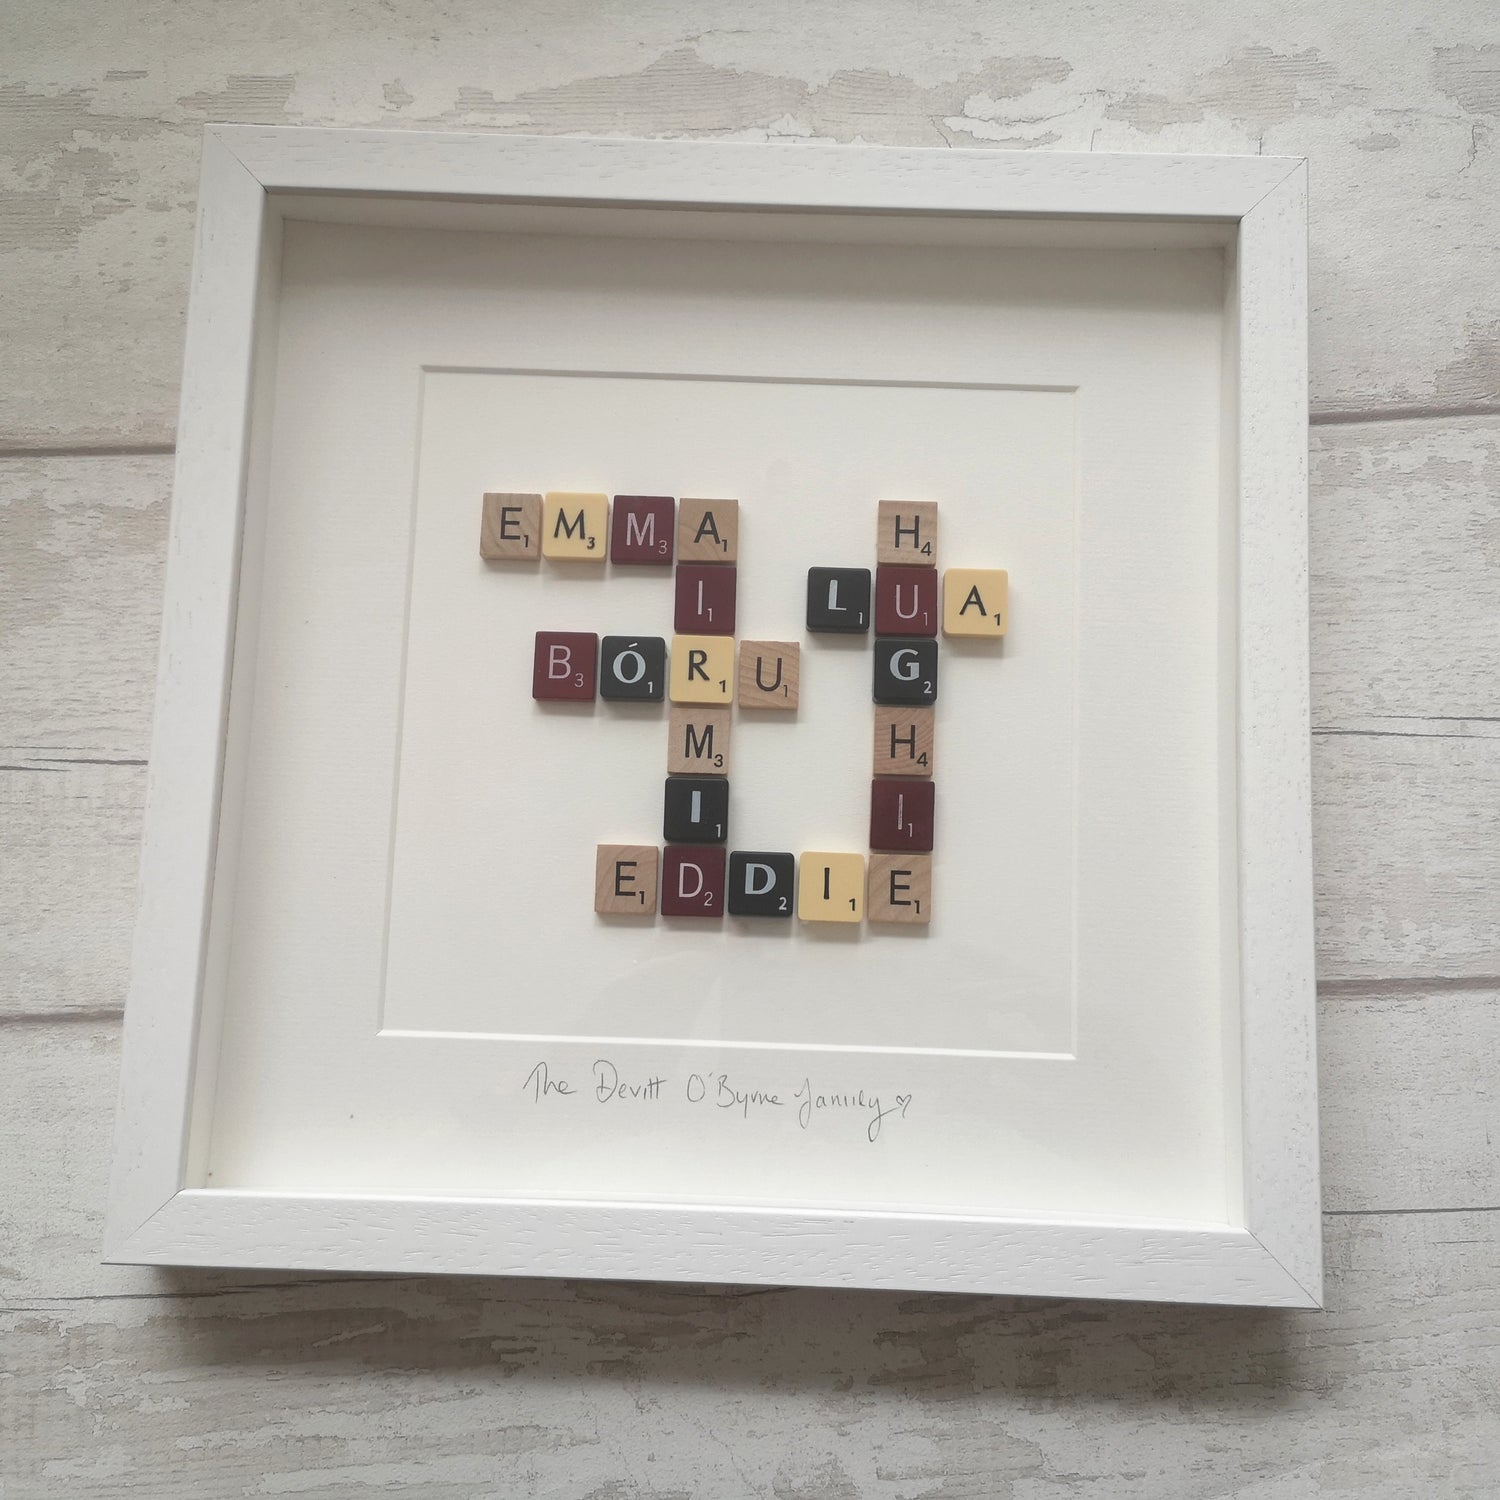 A white 30x30cm handmade wooden frame with mixed vintage and contemporary scrabble tiles, laid out like on a scrabble board.  Showing family names